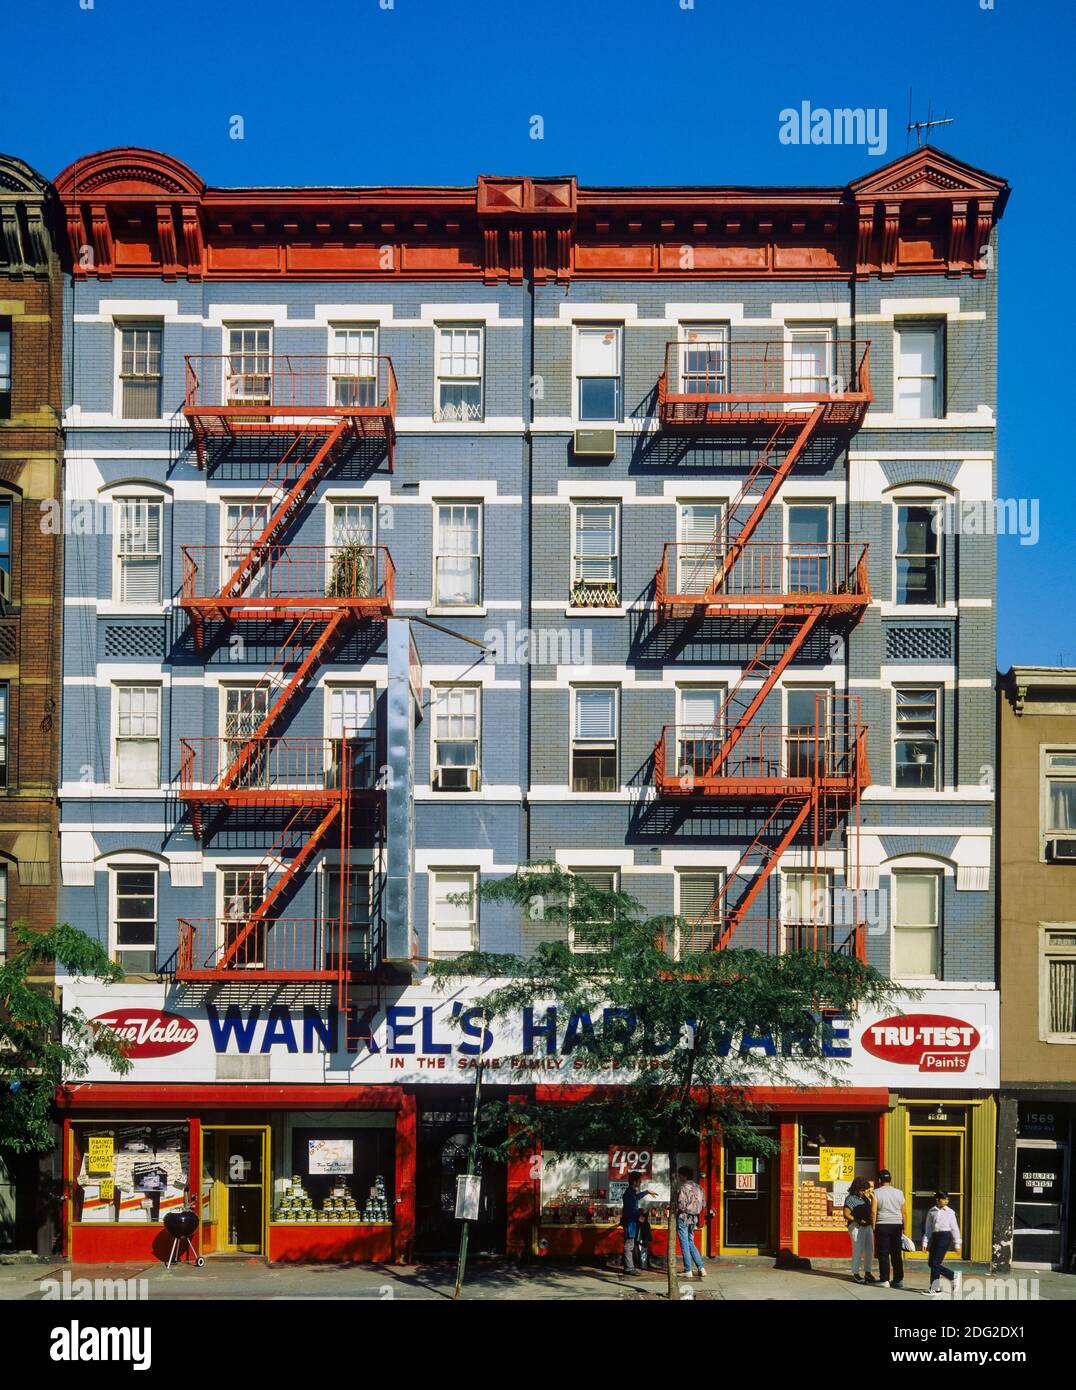 New York 1985, Wankel's hardware store, red fire escape stairs,Third Avenue, Yorkville, Upper East Side Manhattan, New york City, NY, NYC, USA, Stock Photo